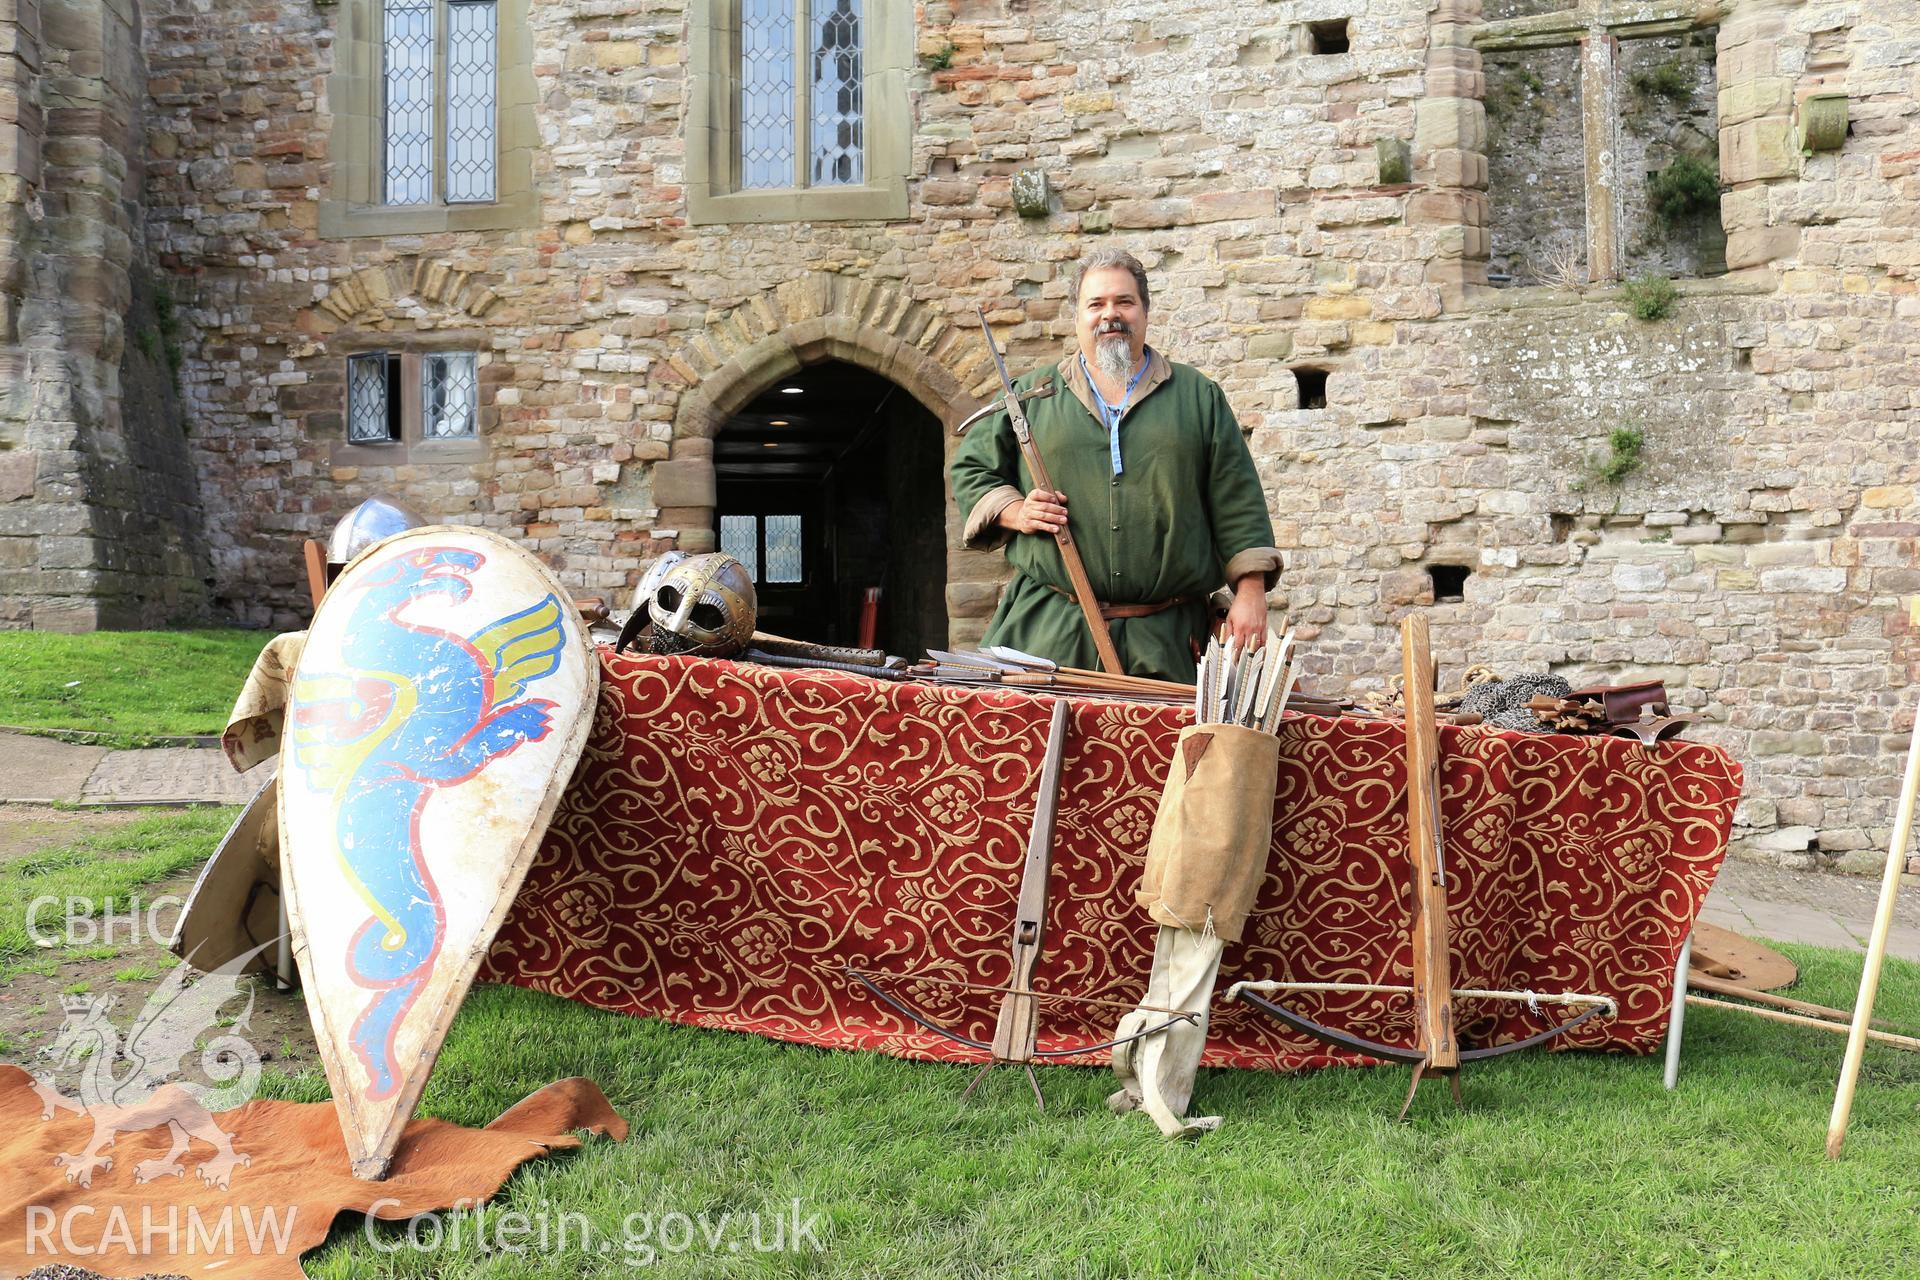 Investigators Photographs at Chepstow Castle. Neil Eddiford from the Bowlore Medieval Group presenting a display of reconstructed medieval weapons and armour.